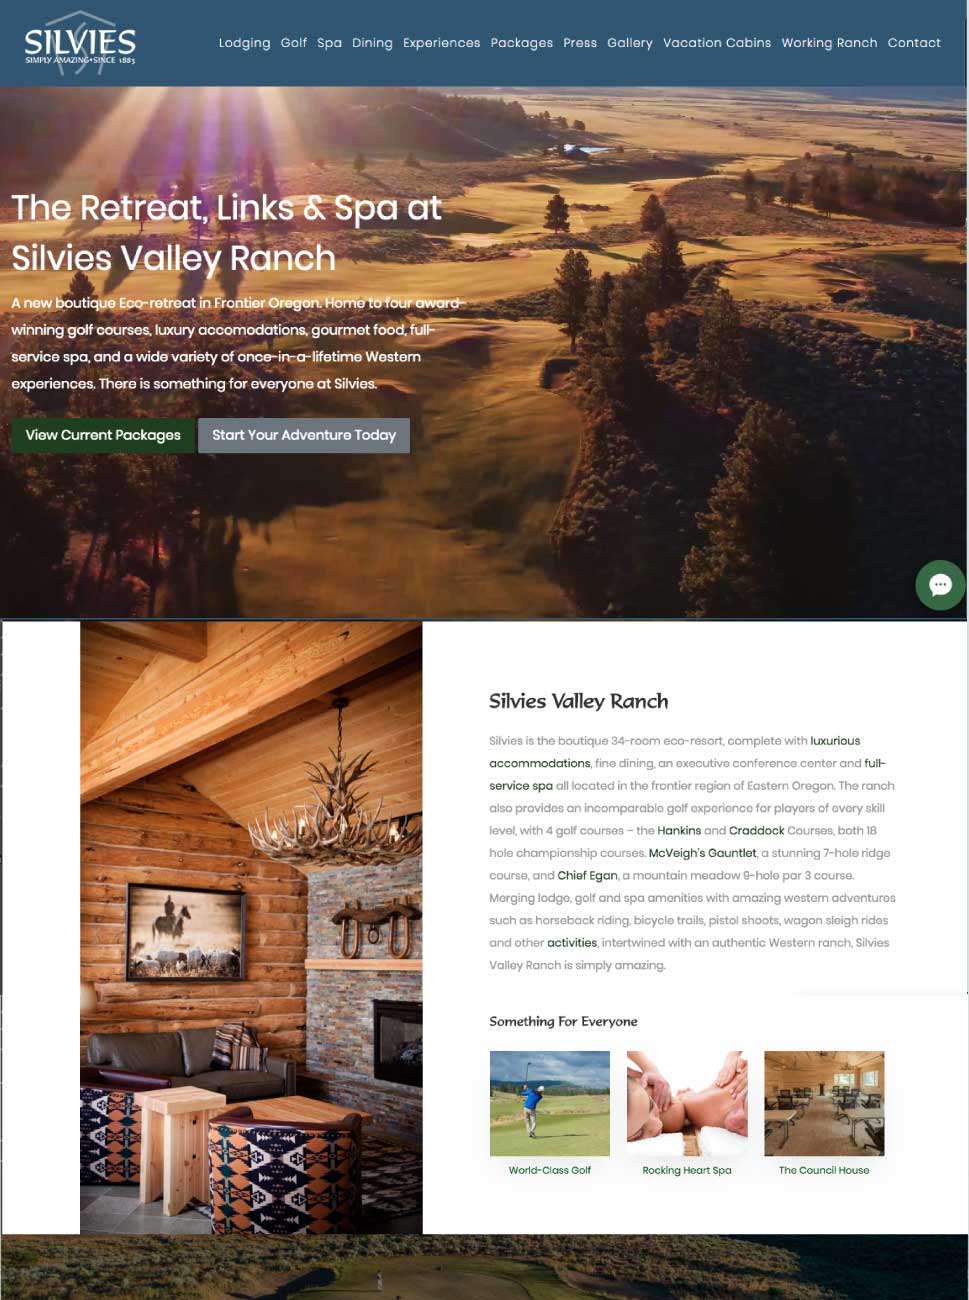 The Retreat, Links & Spa at Silvies Valley Ranch Website